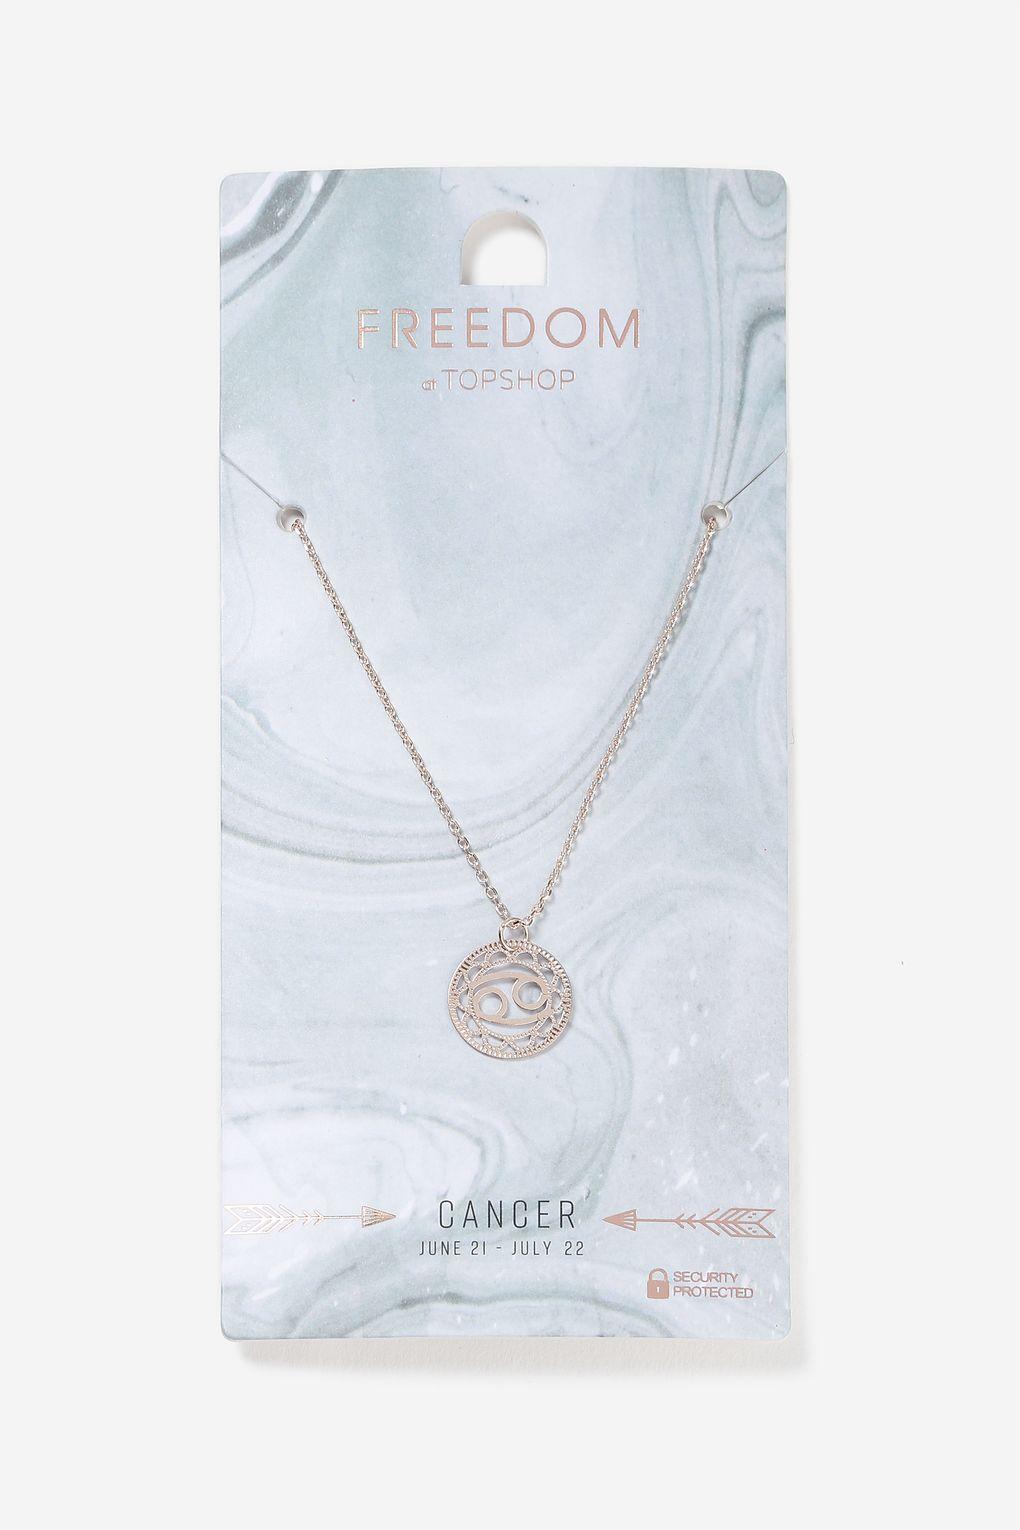 Topshop Freedom Necklace Hotsell, 58% OFF | powerofdance.com